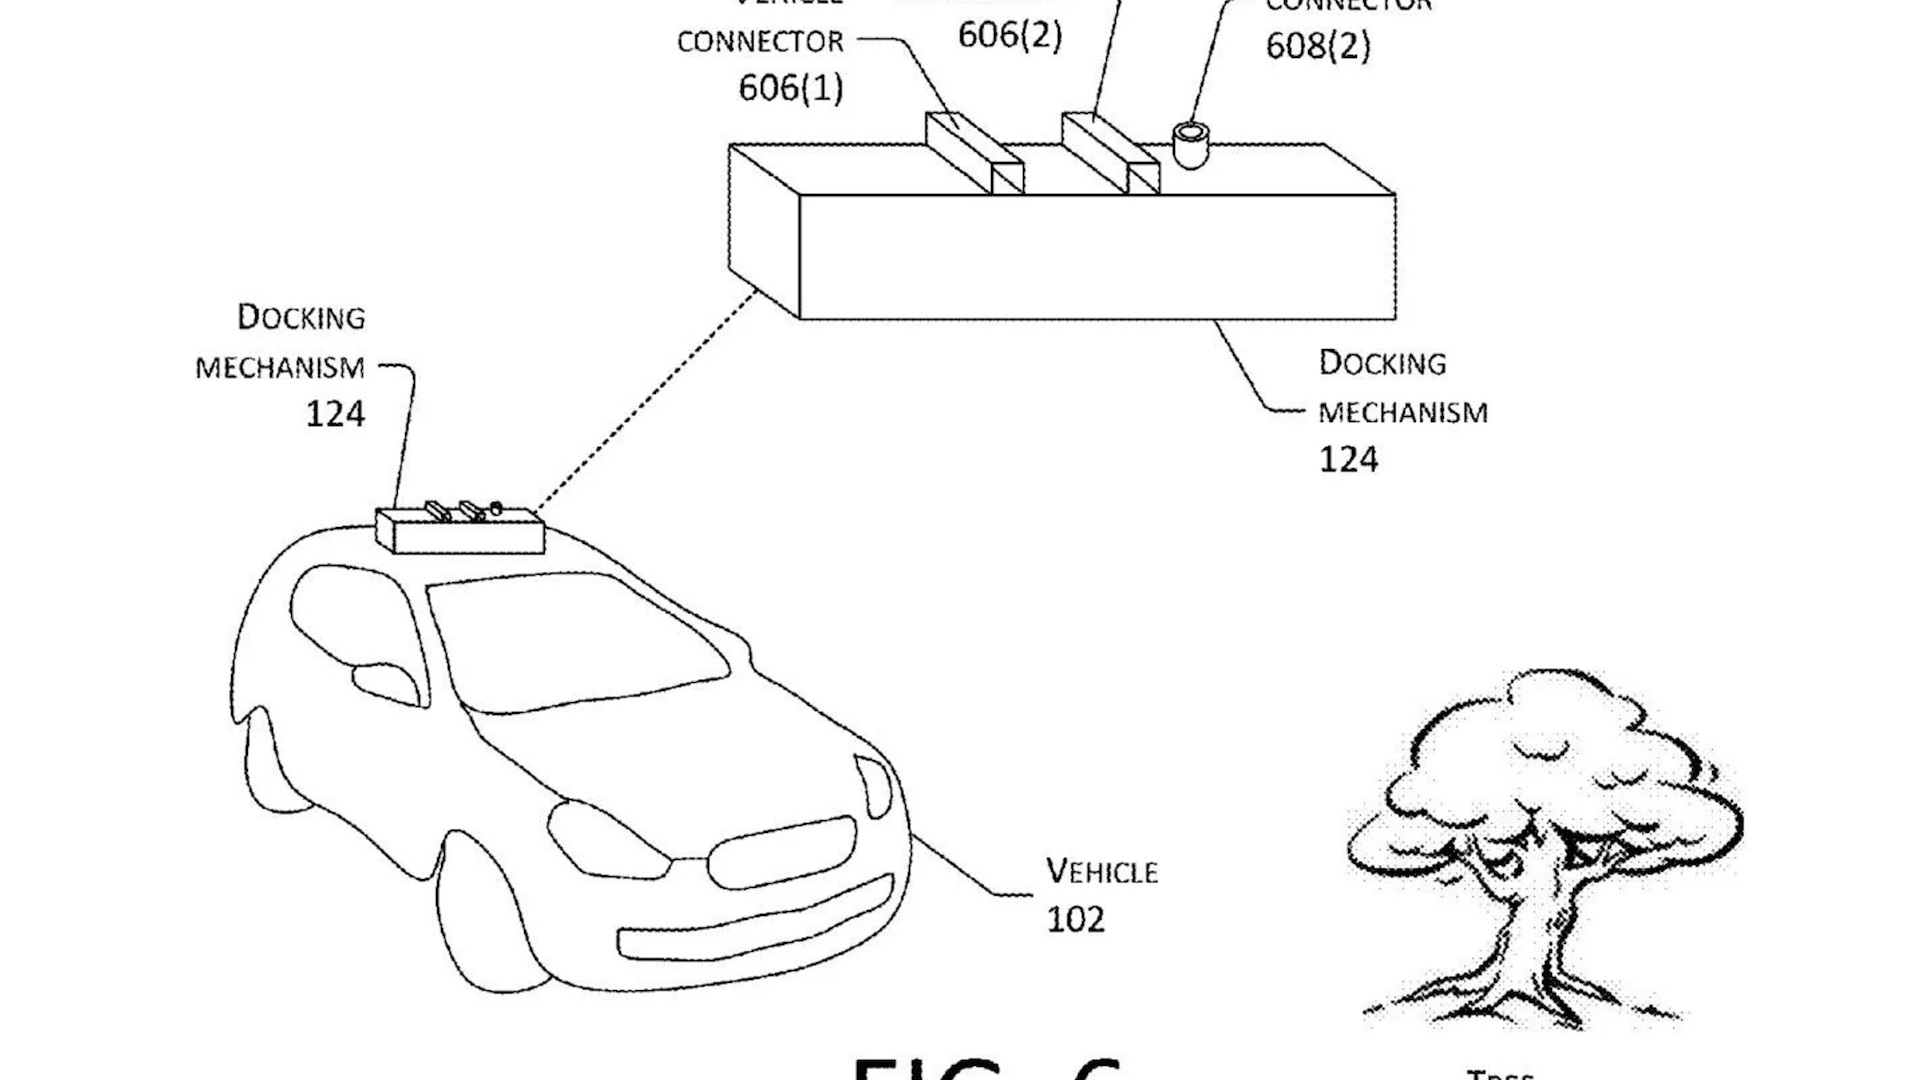 Amazon patent for mobile drone electric car charging